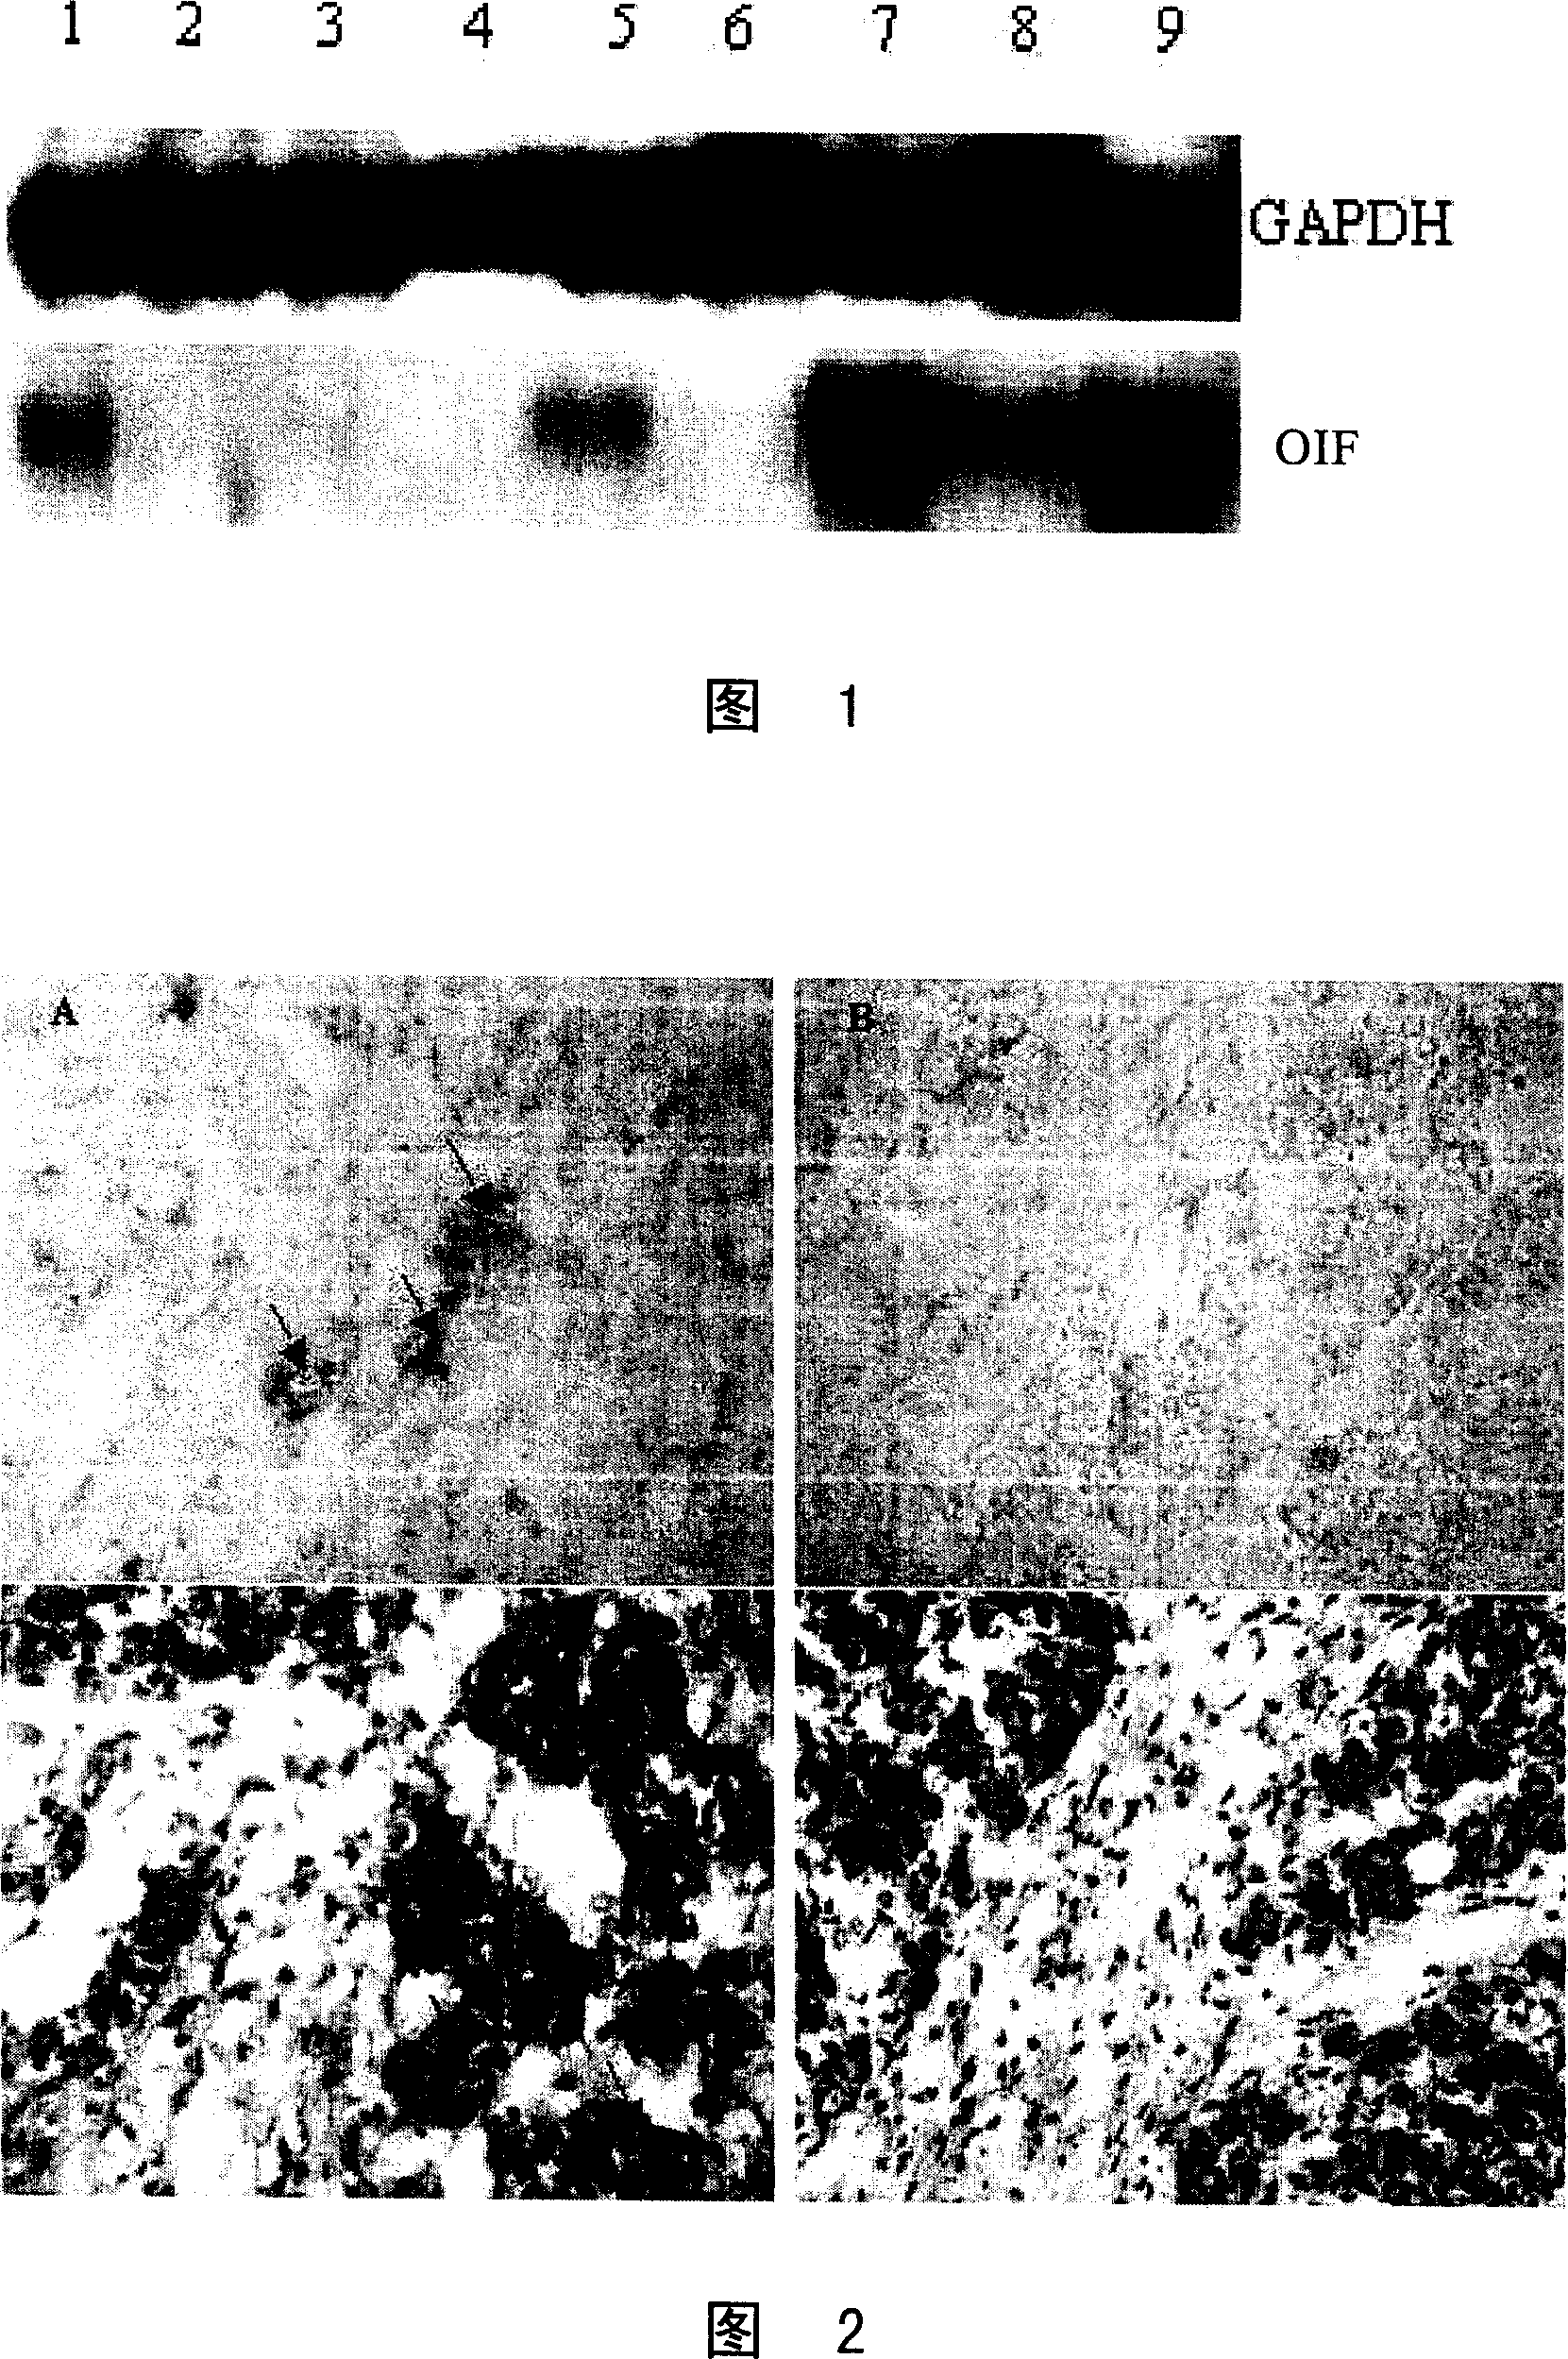 Monoclonal antibody for resisting human osteogenesis induction factor and its preparation method and uses